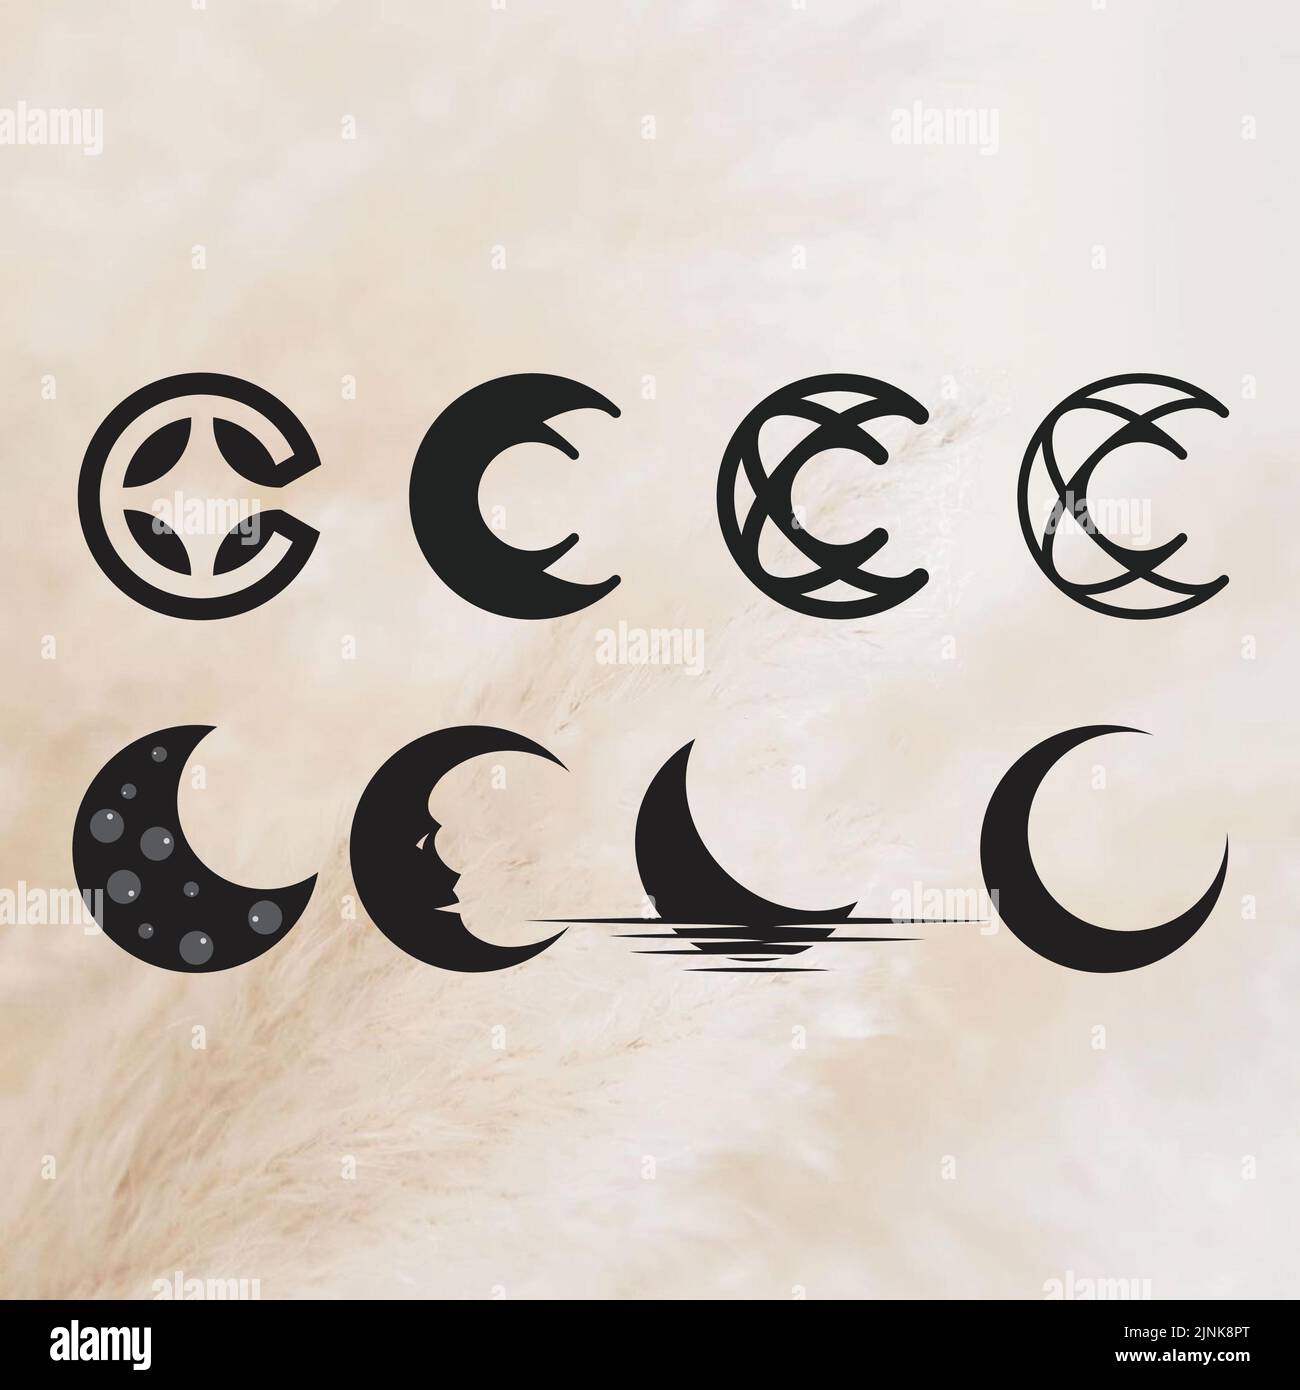 letter c shape a different variety of half moon vector graphics  logo templates. This file has a total of 8 EPS files. Stock Vector